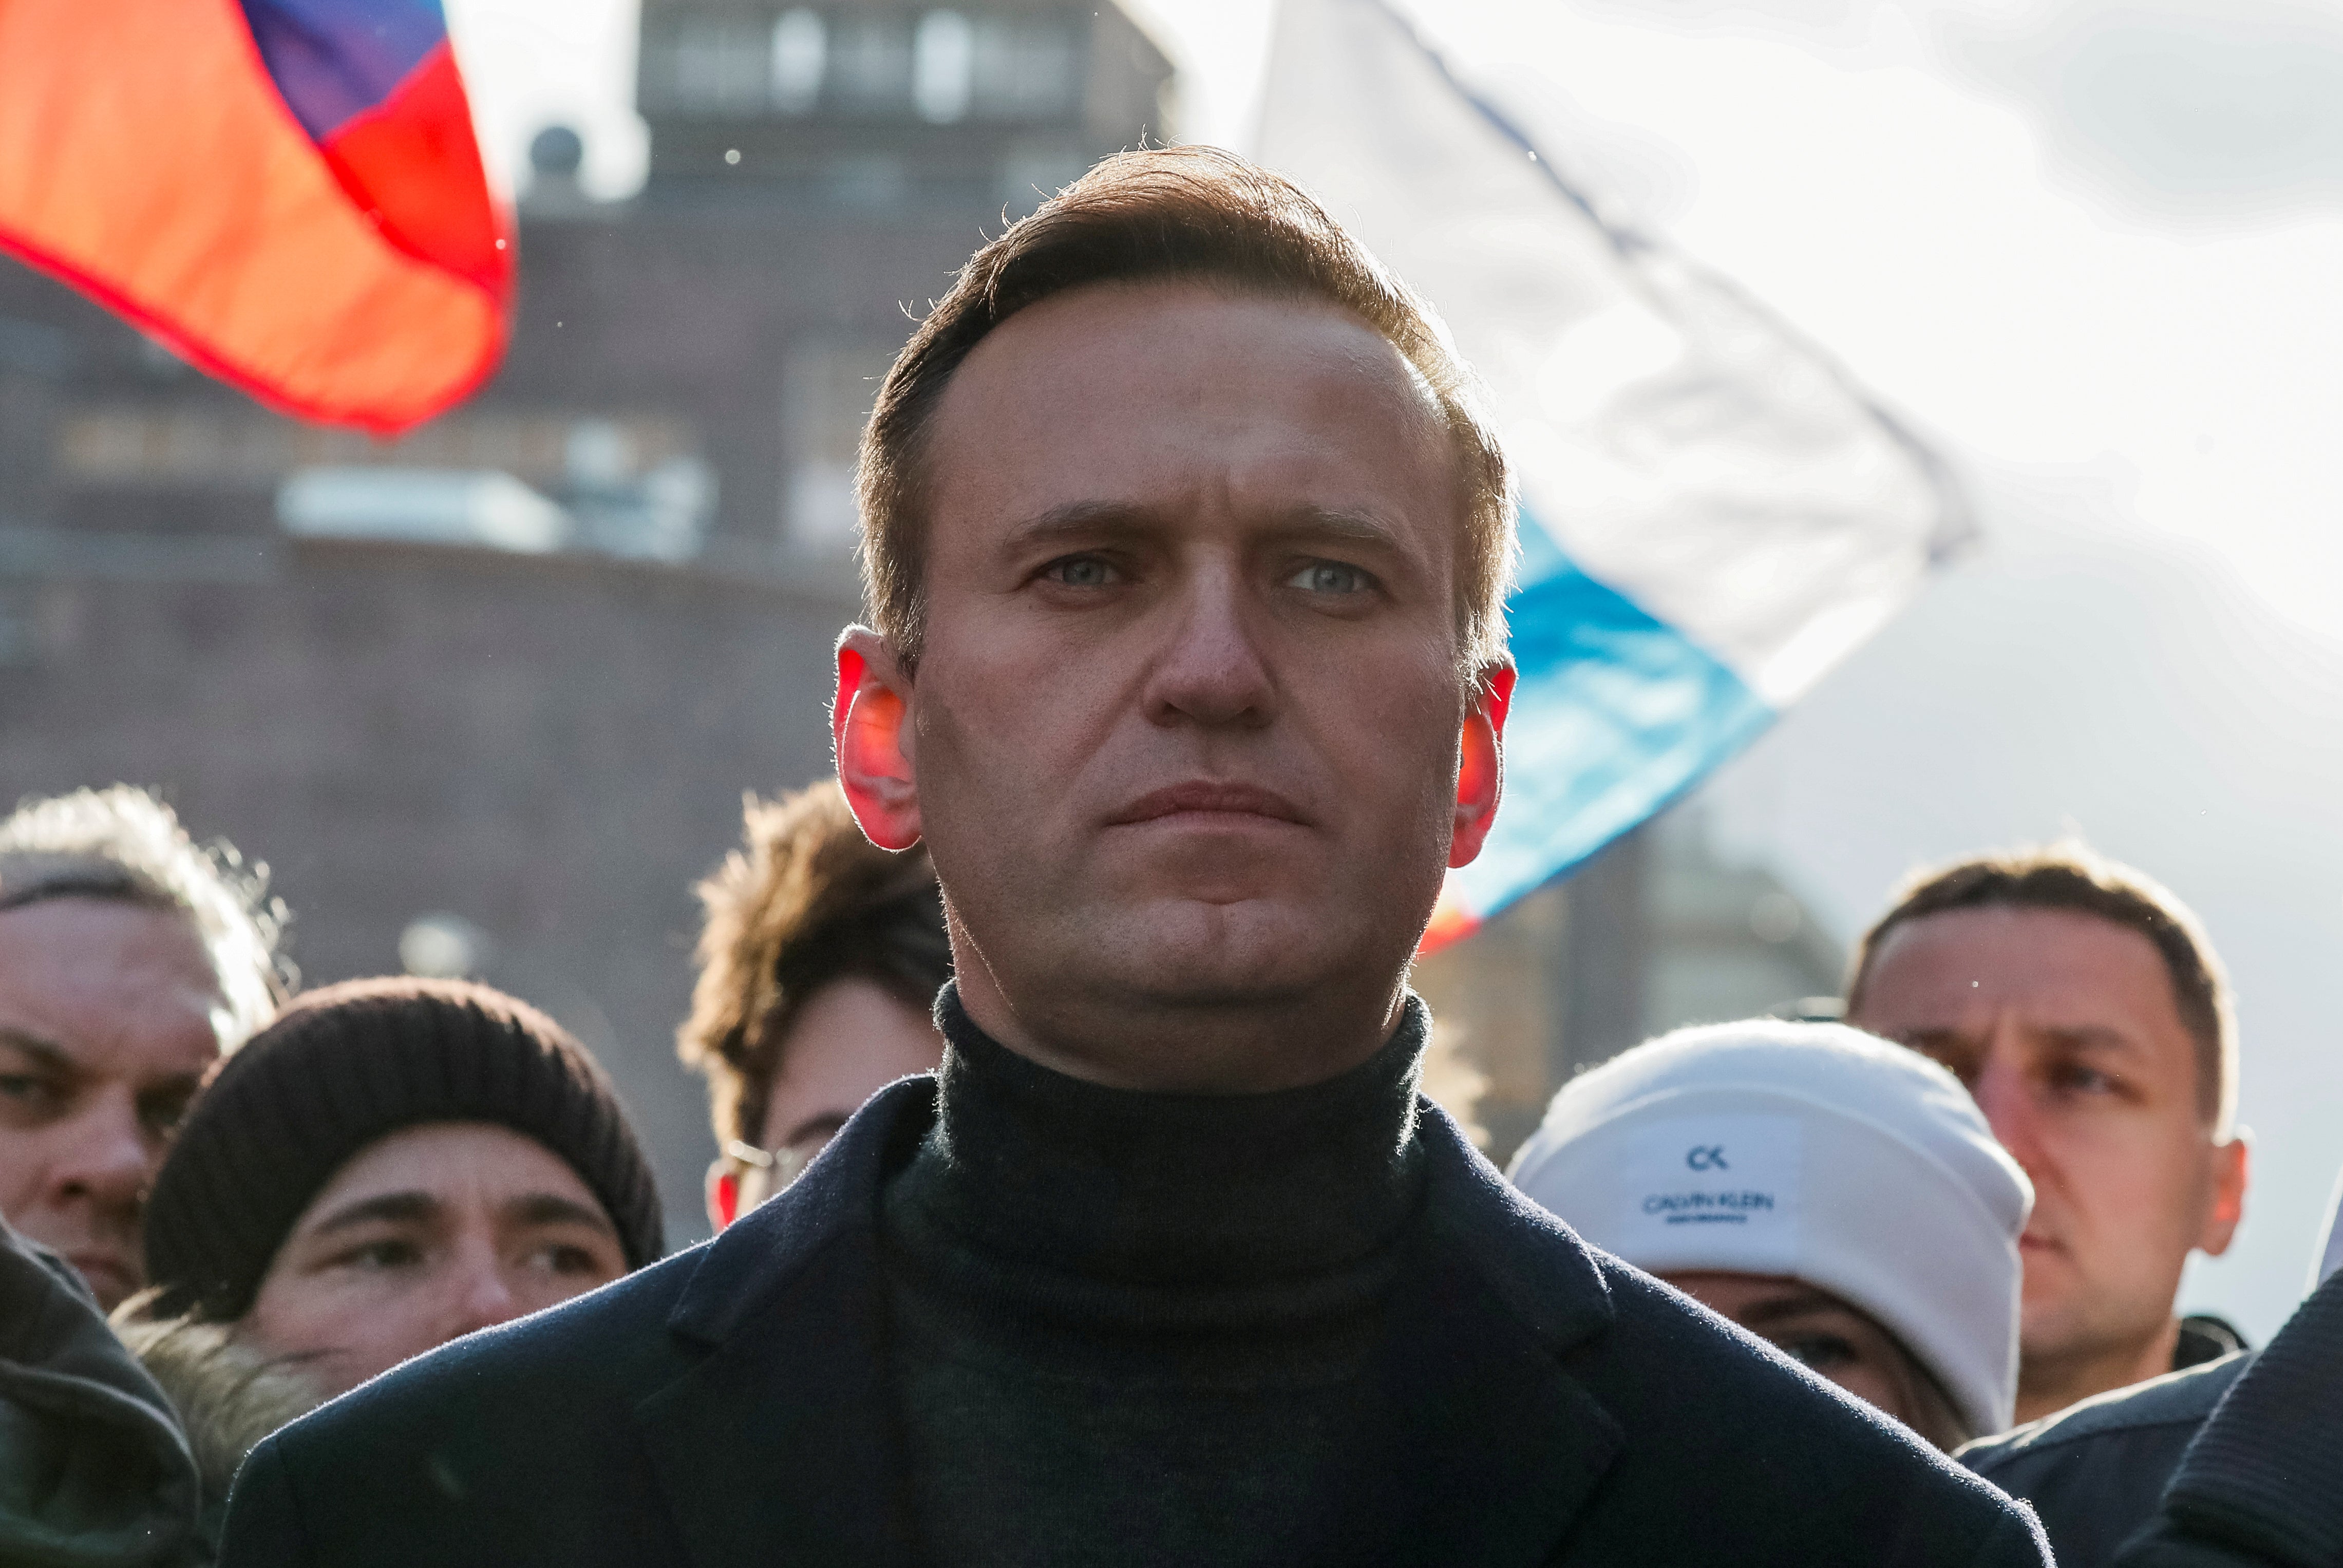 Alexei Navalny was rushed to hospital in August